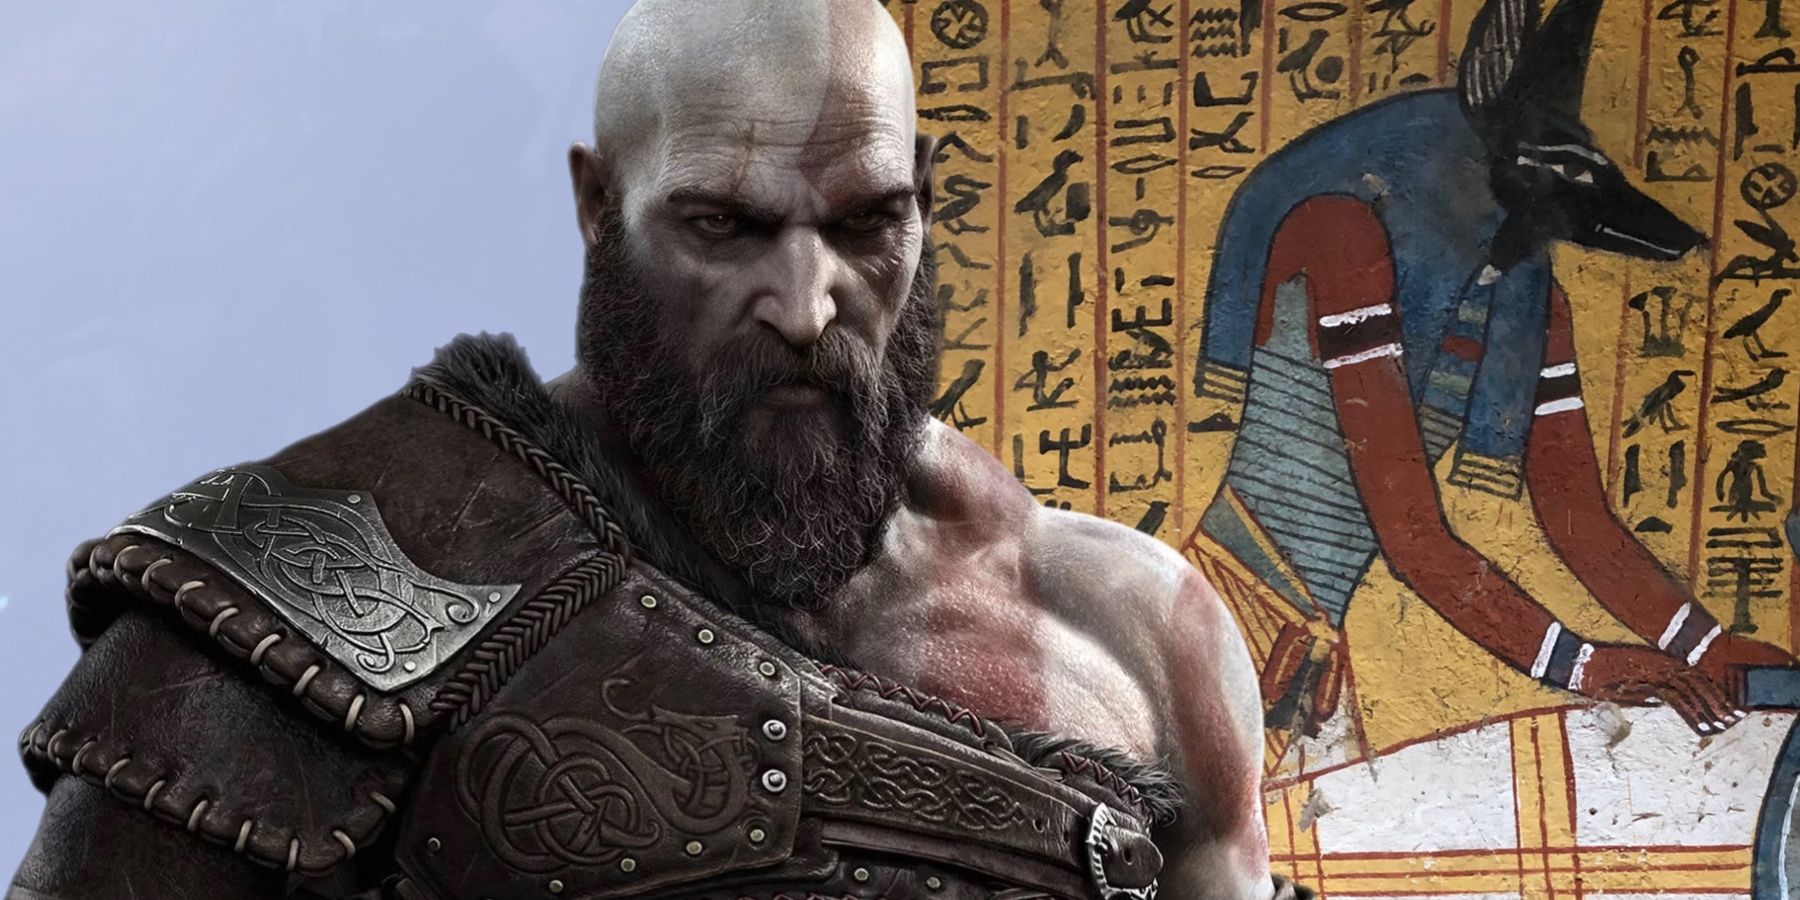 egyptian god of war should be more like greek games than norse in one way